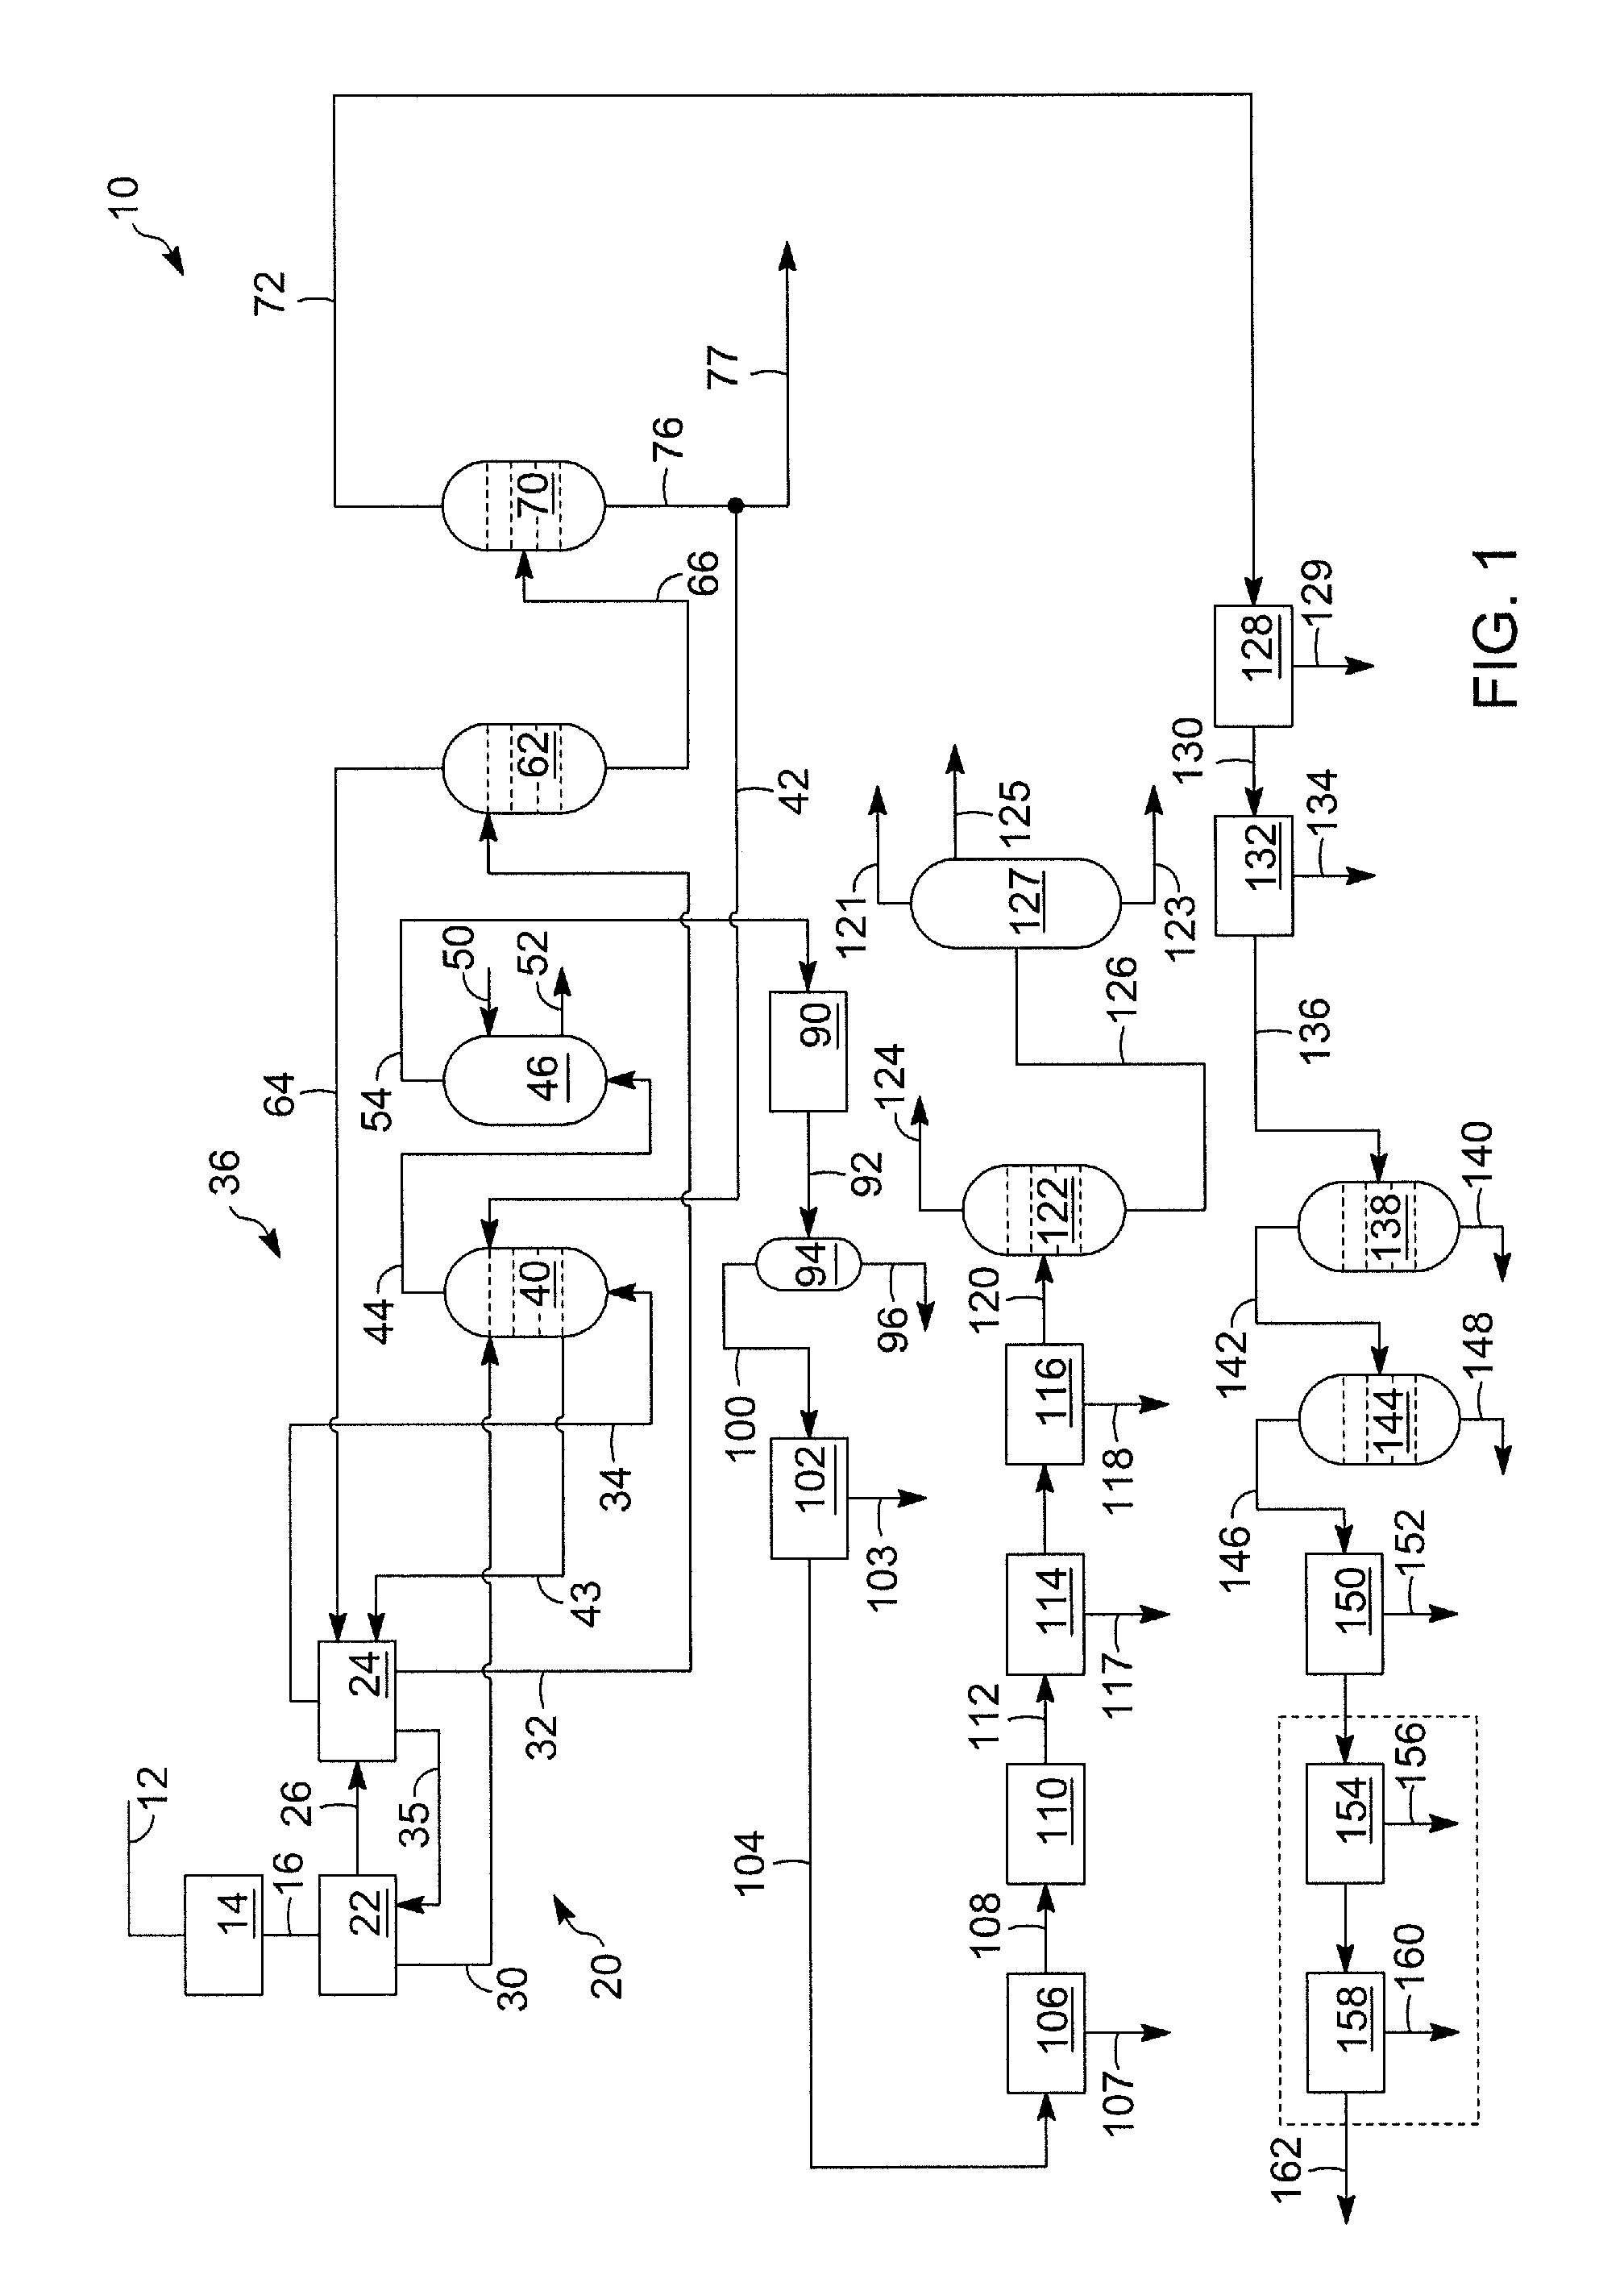 Splitter with Multi-Stage Heat Pump Compressor and Inter-Reboiler